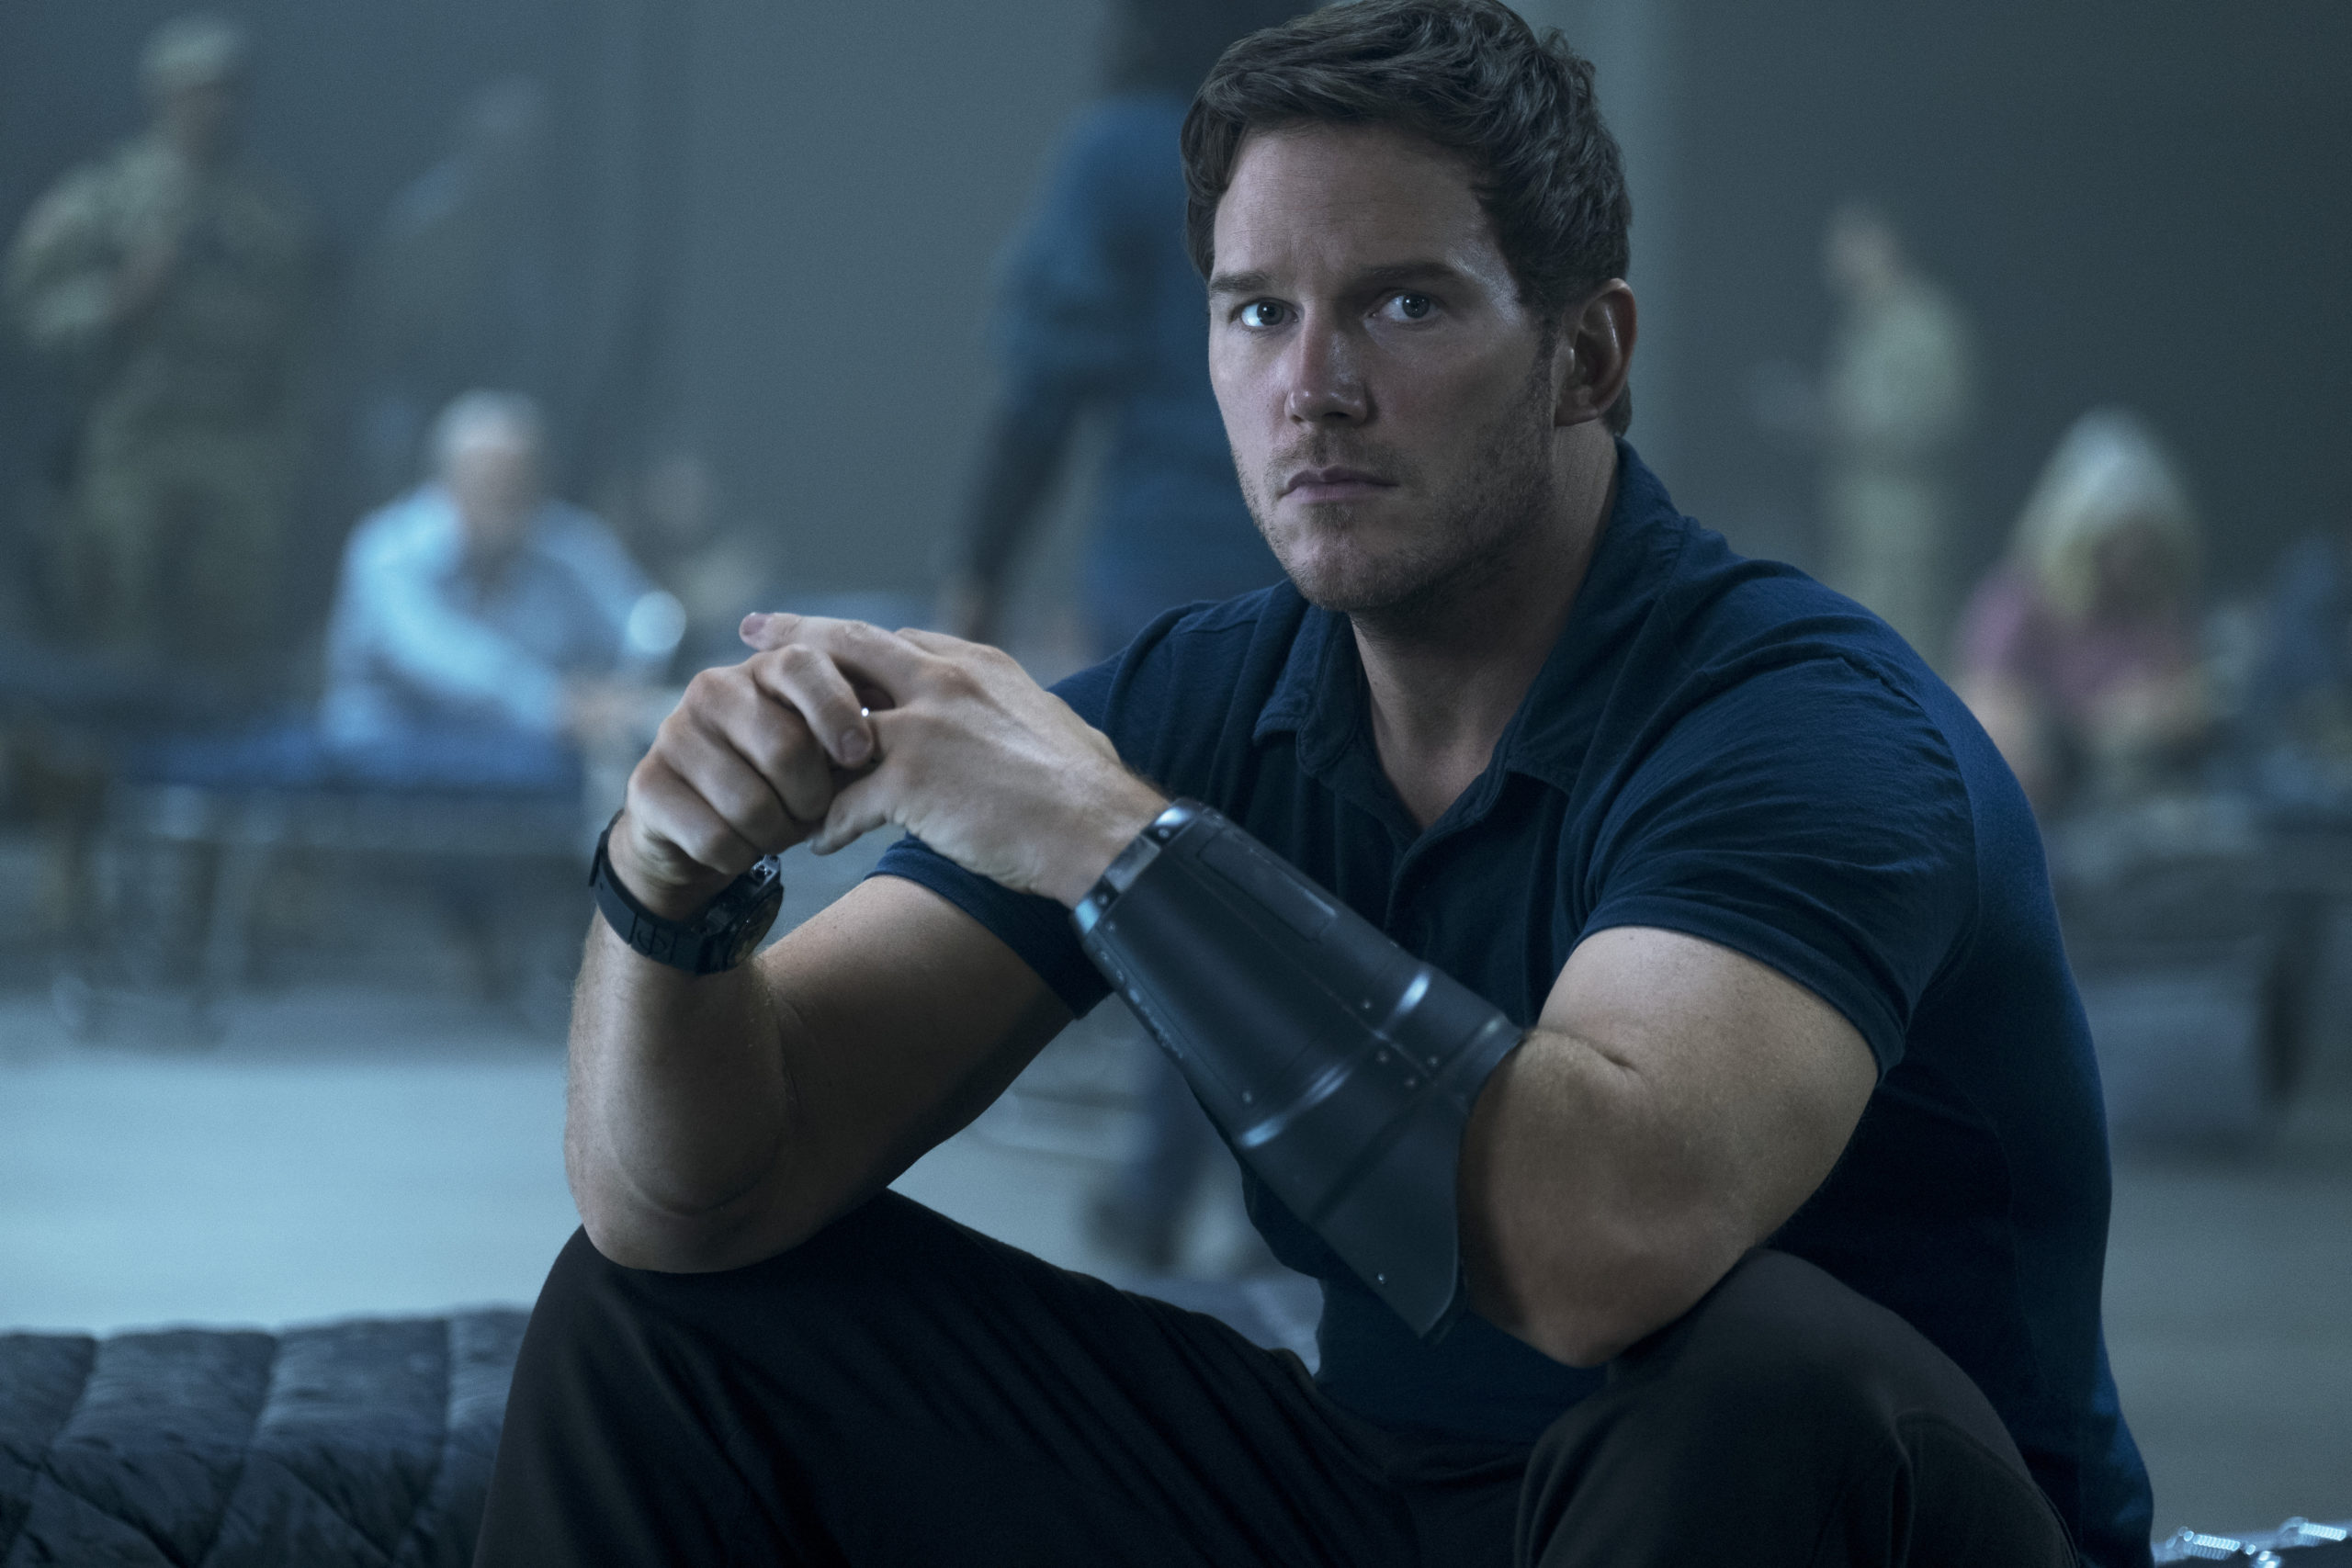 LRM EXCLUSIVE CLIP From The Tomorrow War Featuring Chris Pratt